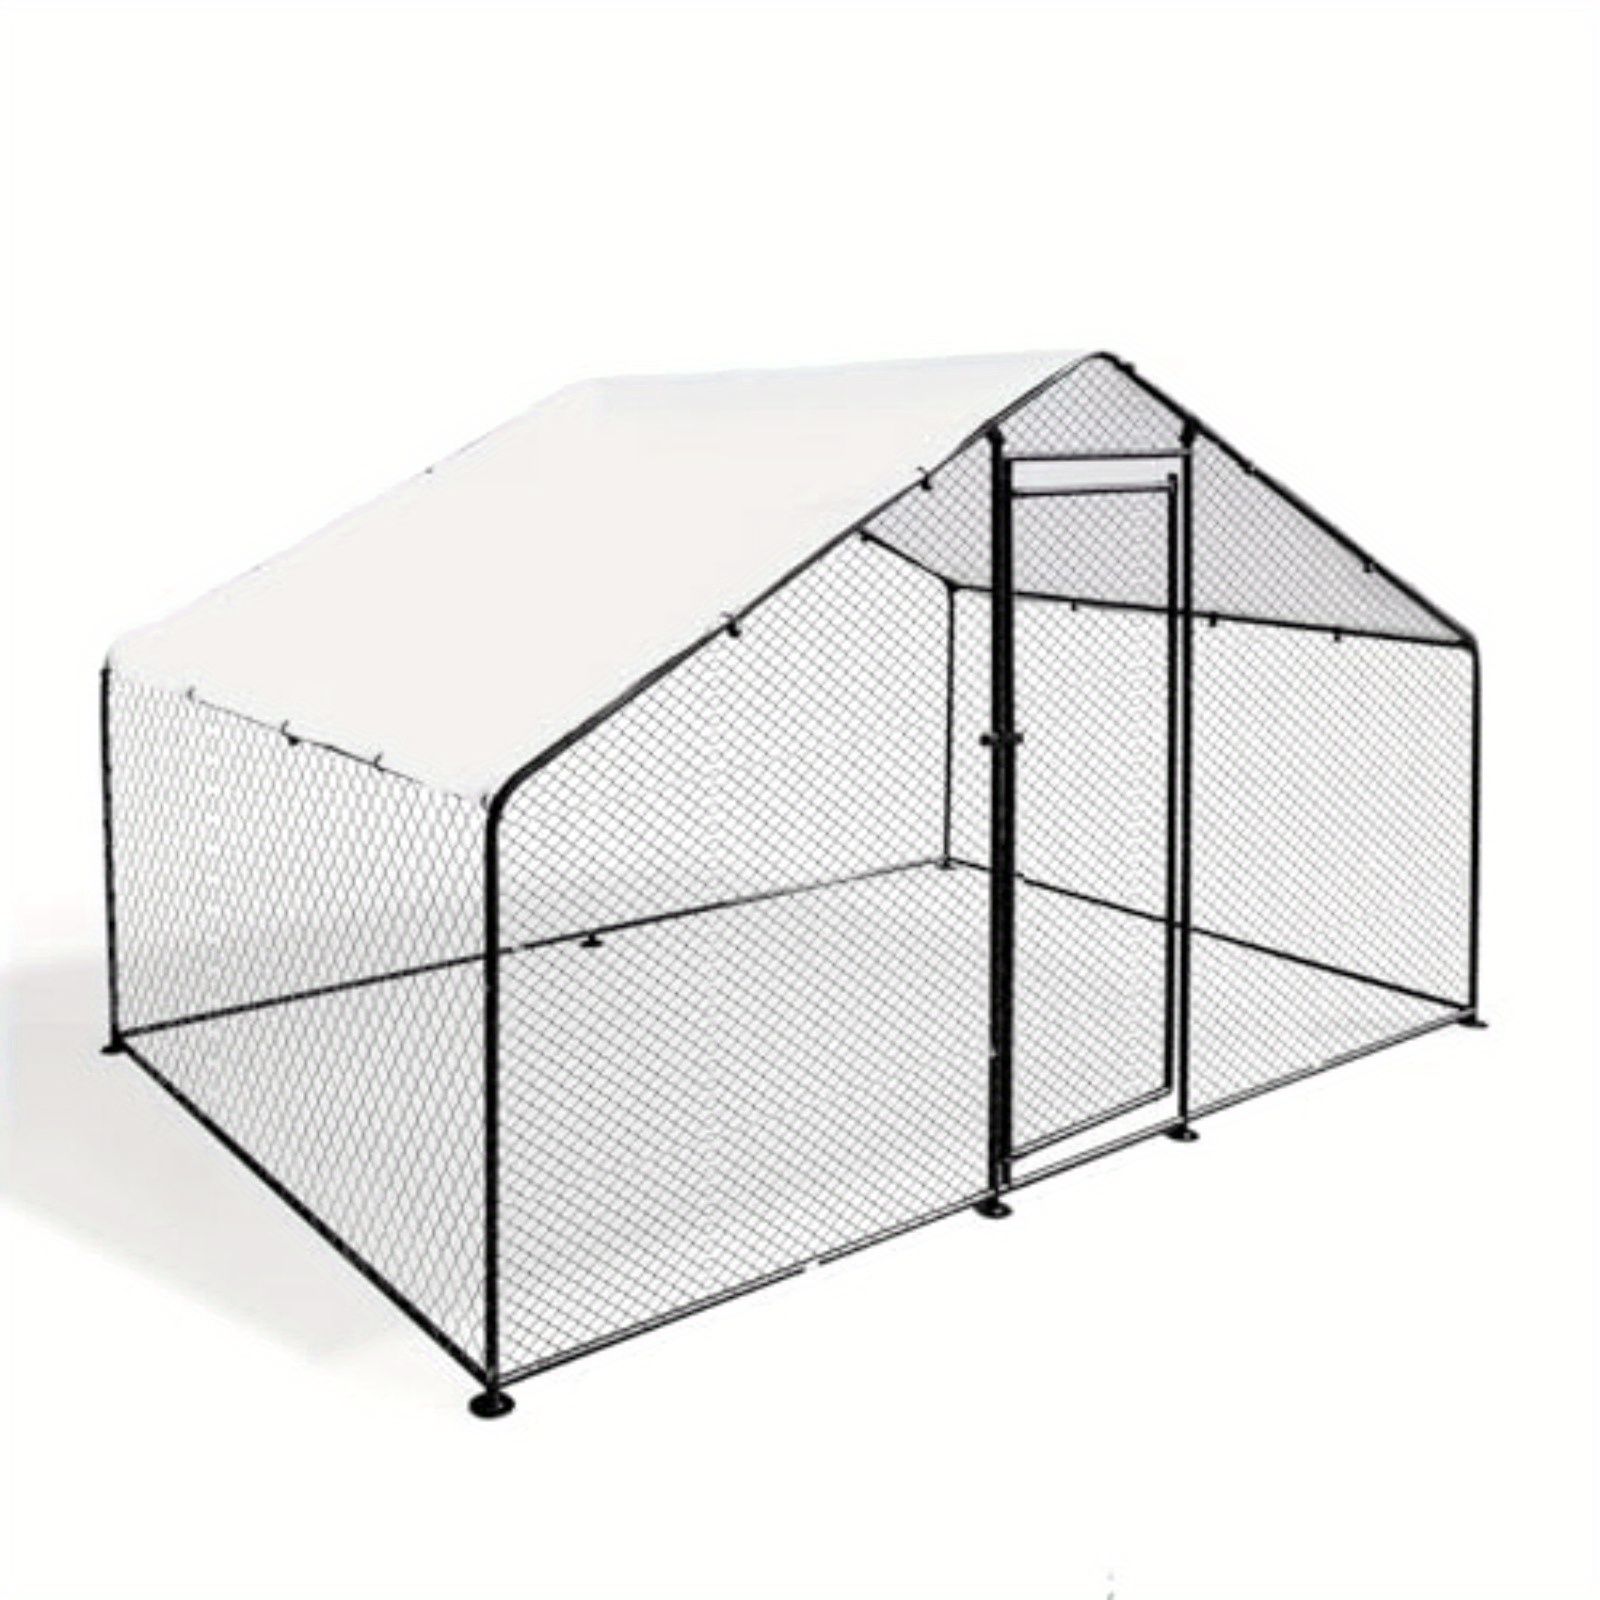 

Large Metal Chicken Coop Walk-in Poultry Cage House Duck Rabbit Pen With Waterproof & Anti-uv Cover For Outdoor Yard Farm Use